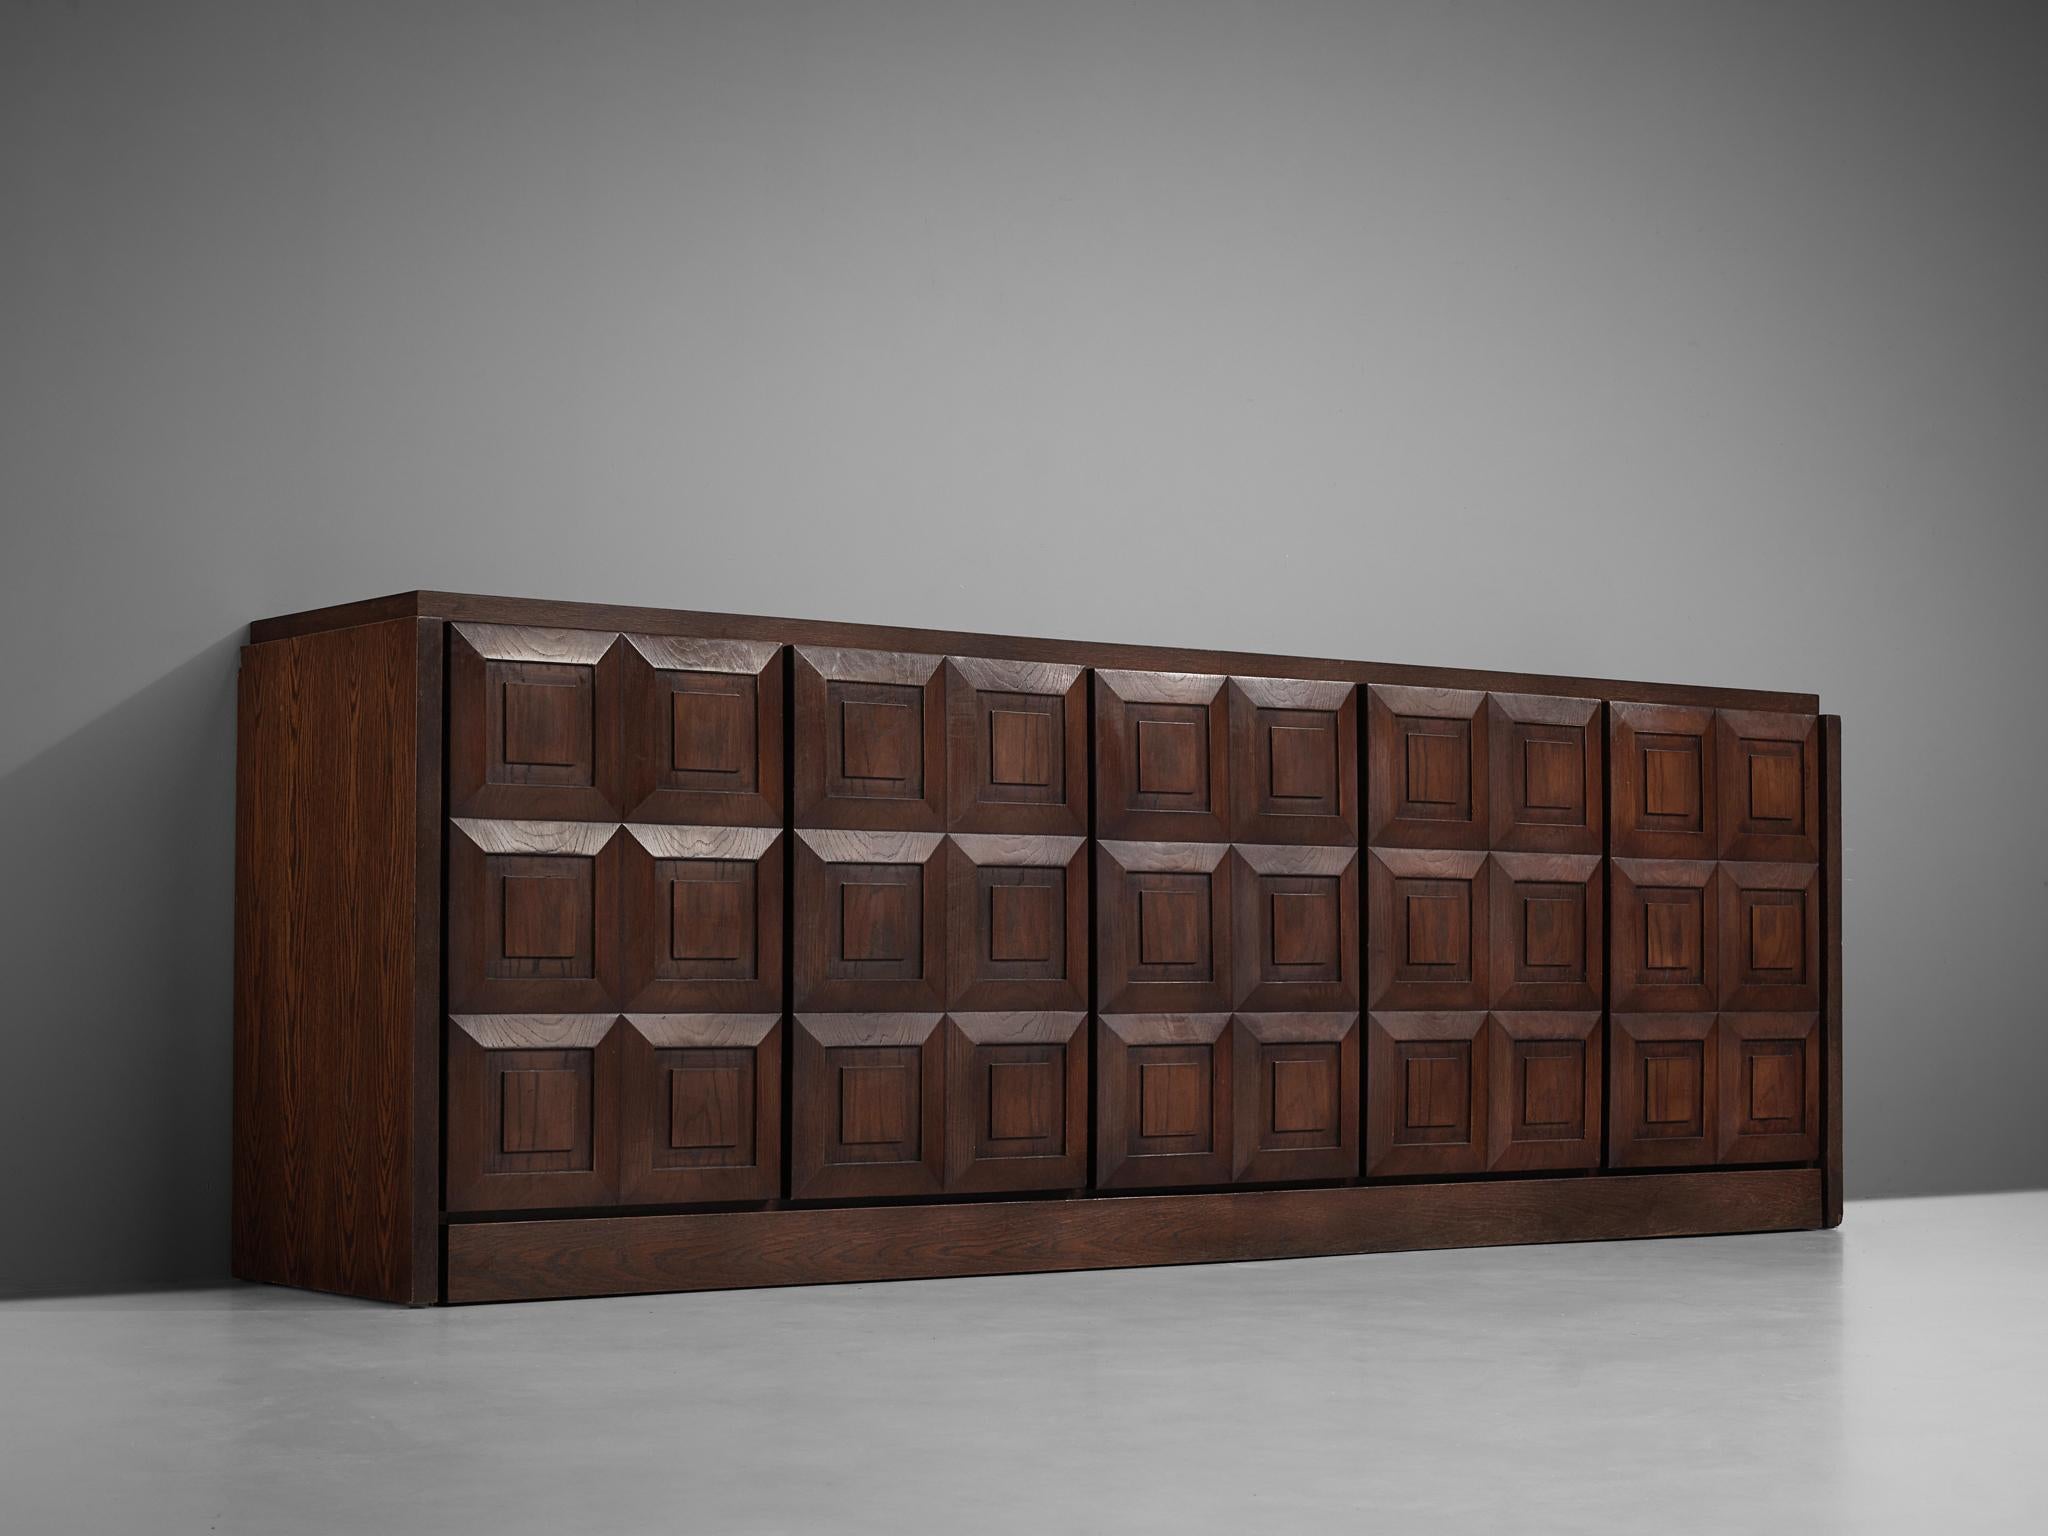 Sideboard, stained oak, Belgium, 1970s. 

This very evocative credenza features a clear rhythm and flow established by means of a well thought through lay out that is utterly well-balanced. The carved squares immediately catch the eye and are the